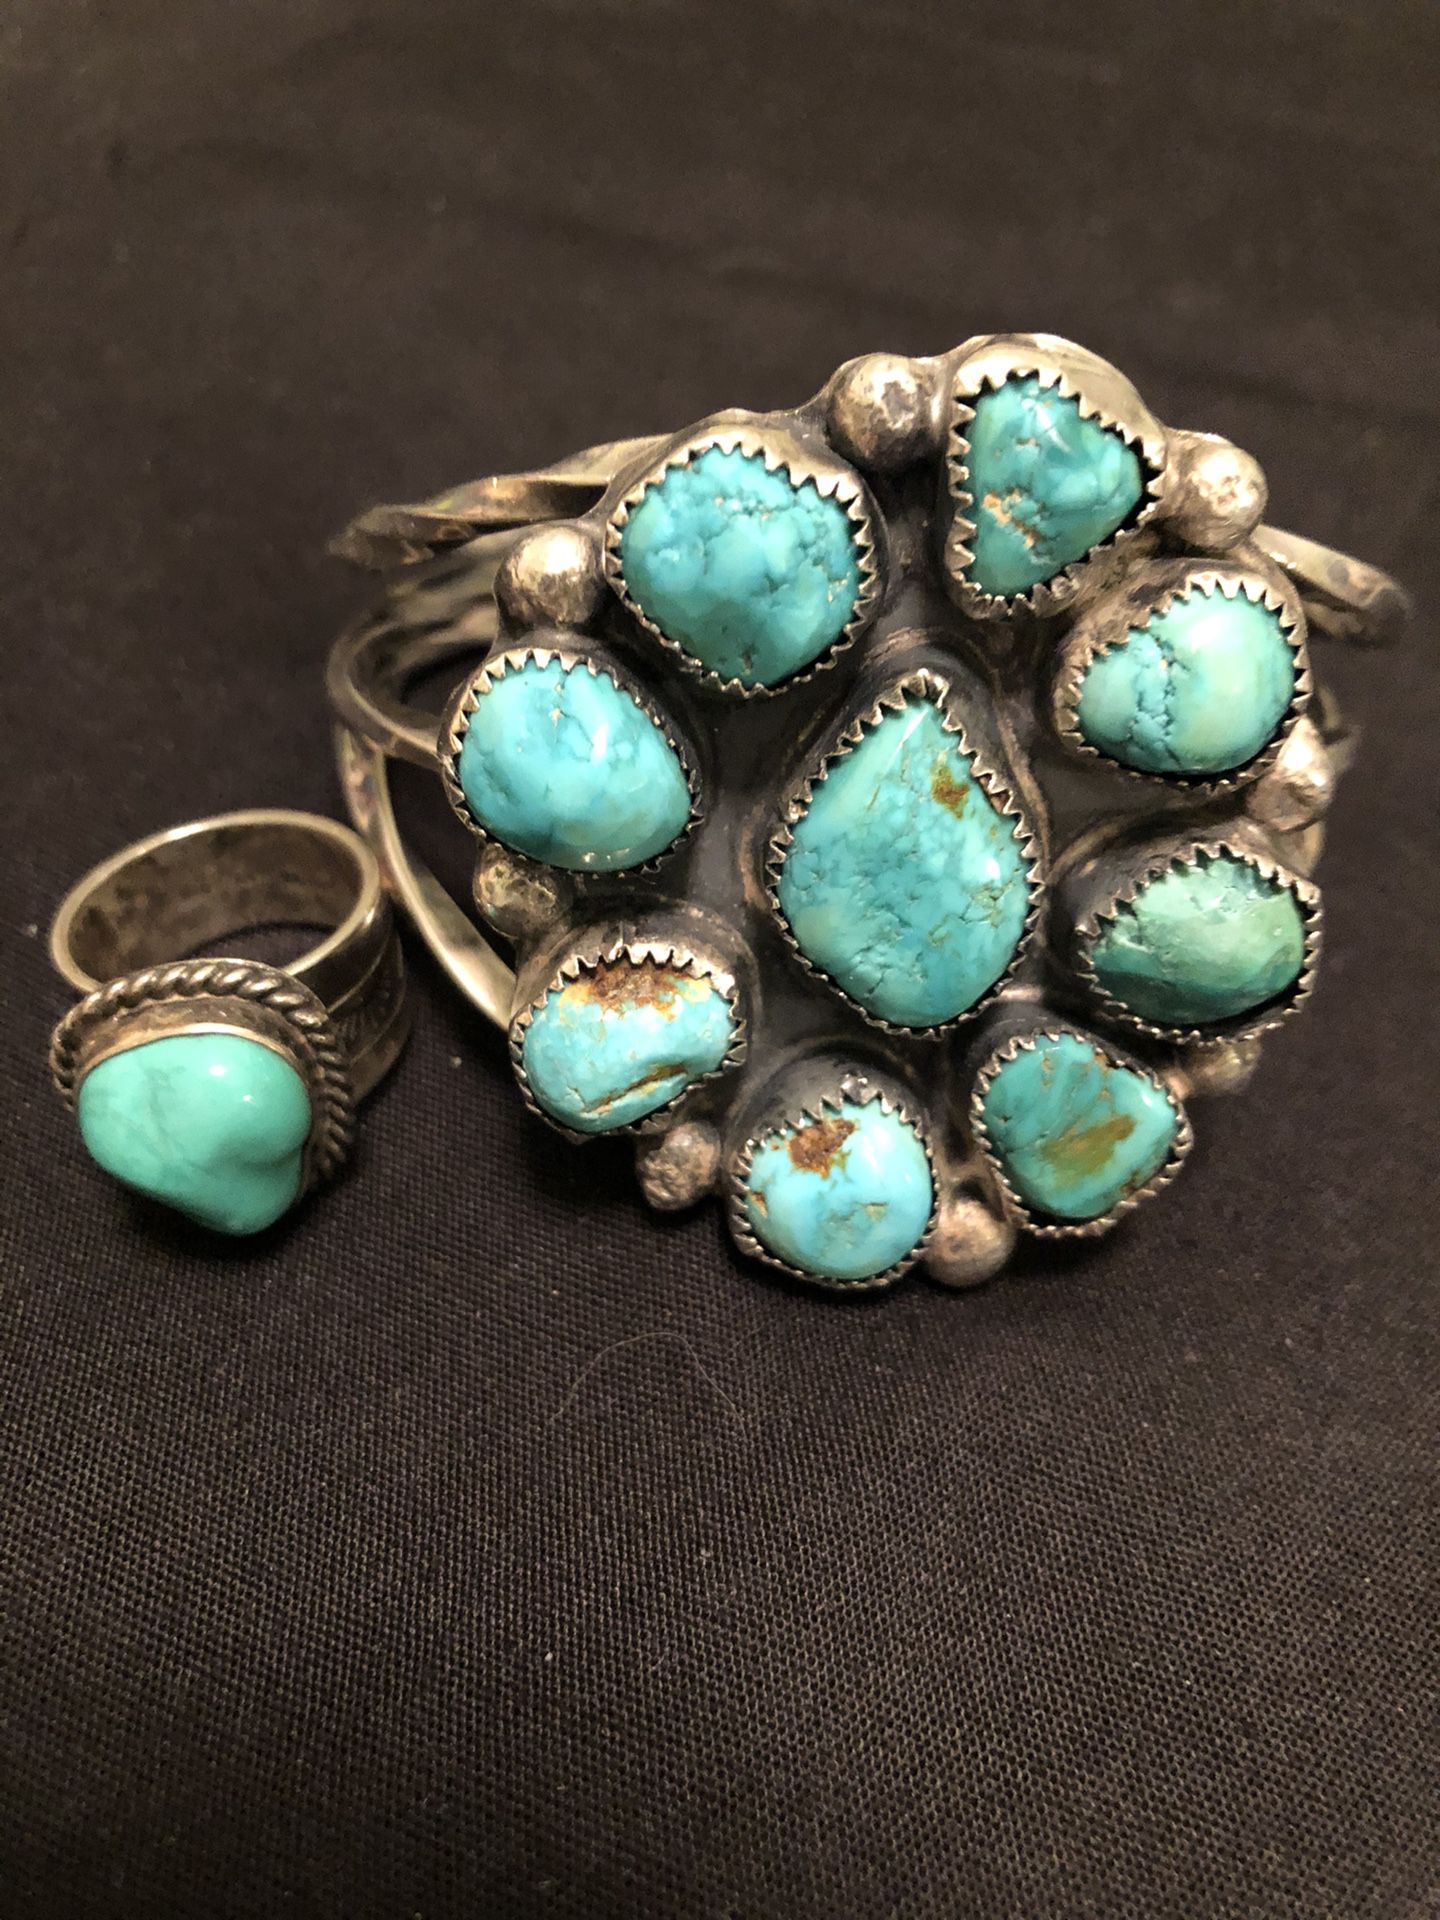 Large turquoise and sterling silver cuff bracelet and ring size 6 true Navajo set